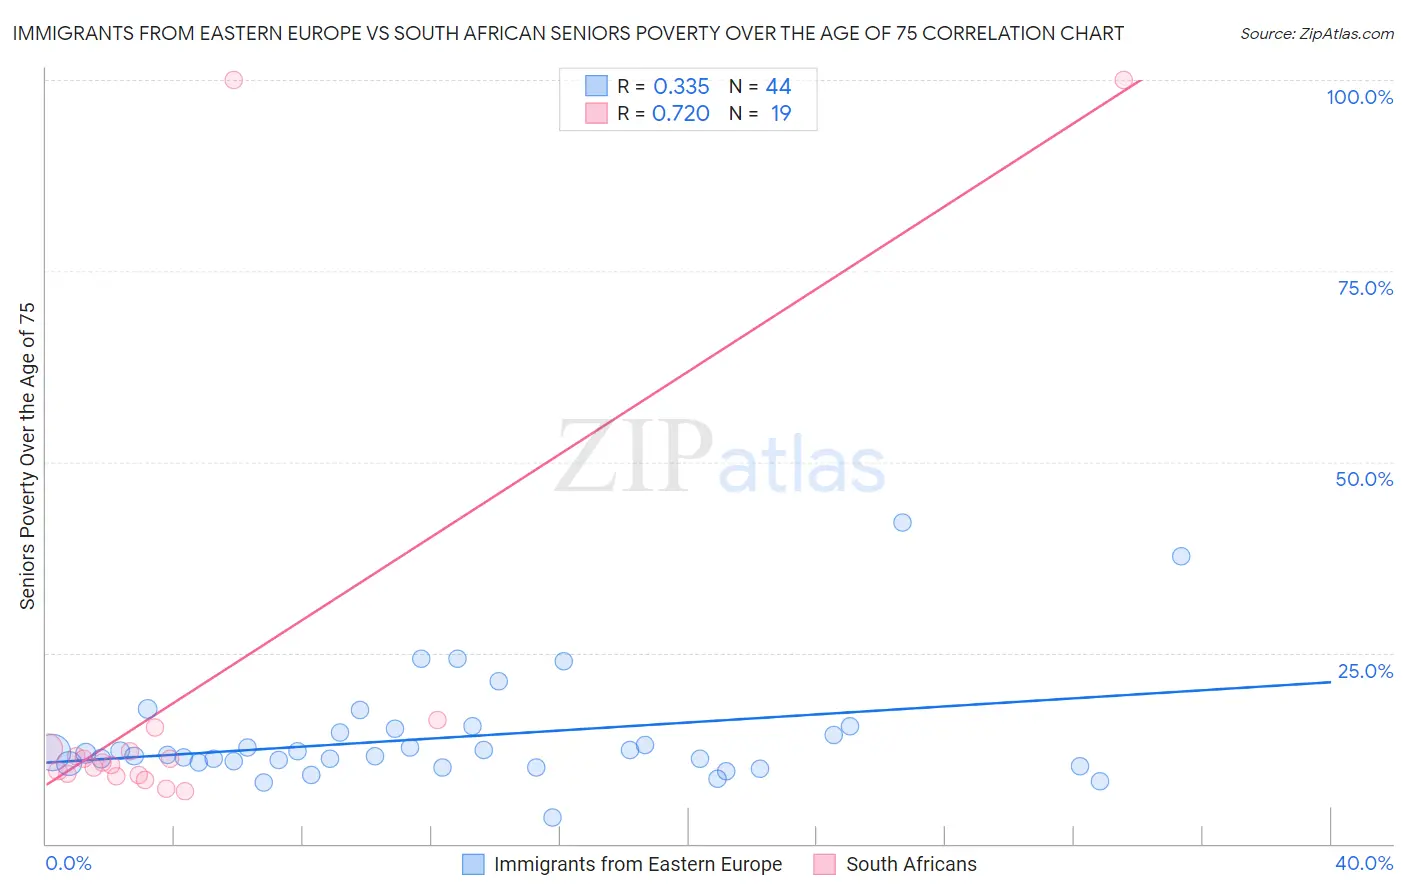 Immigrants from Eastern Europe vs South African Seniors Poverty Over the Age of 75